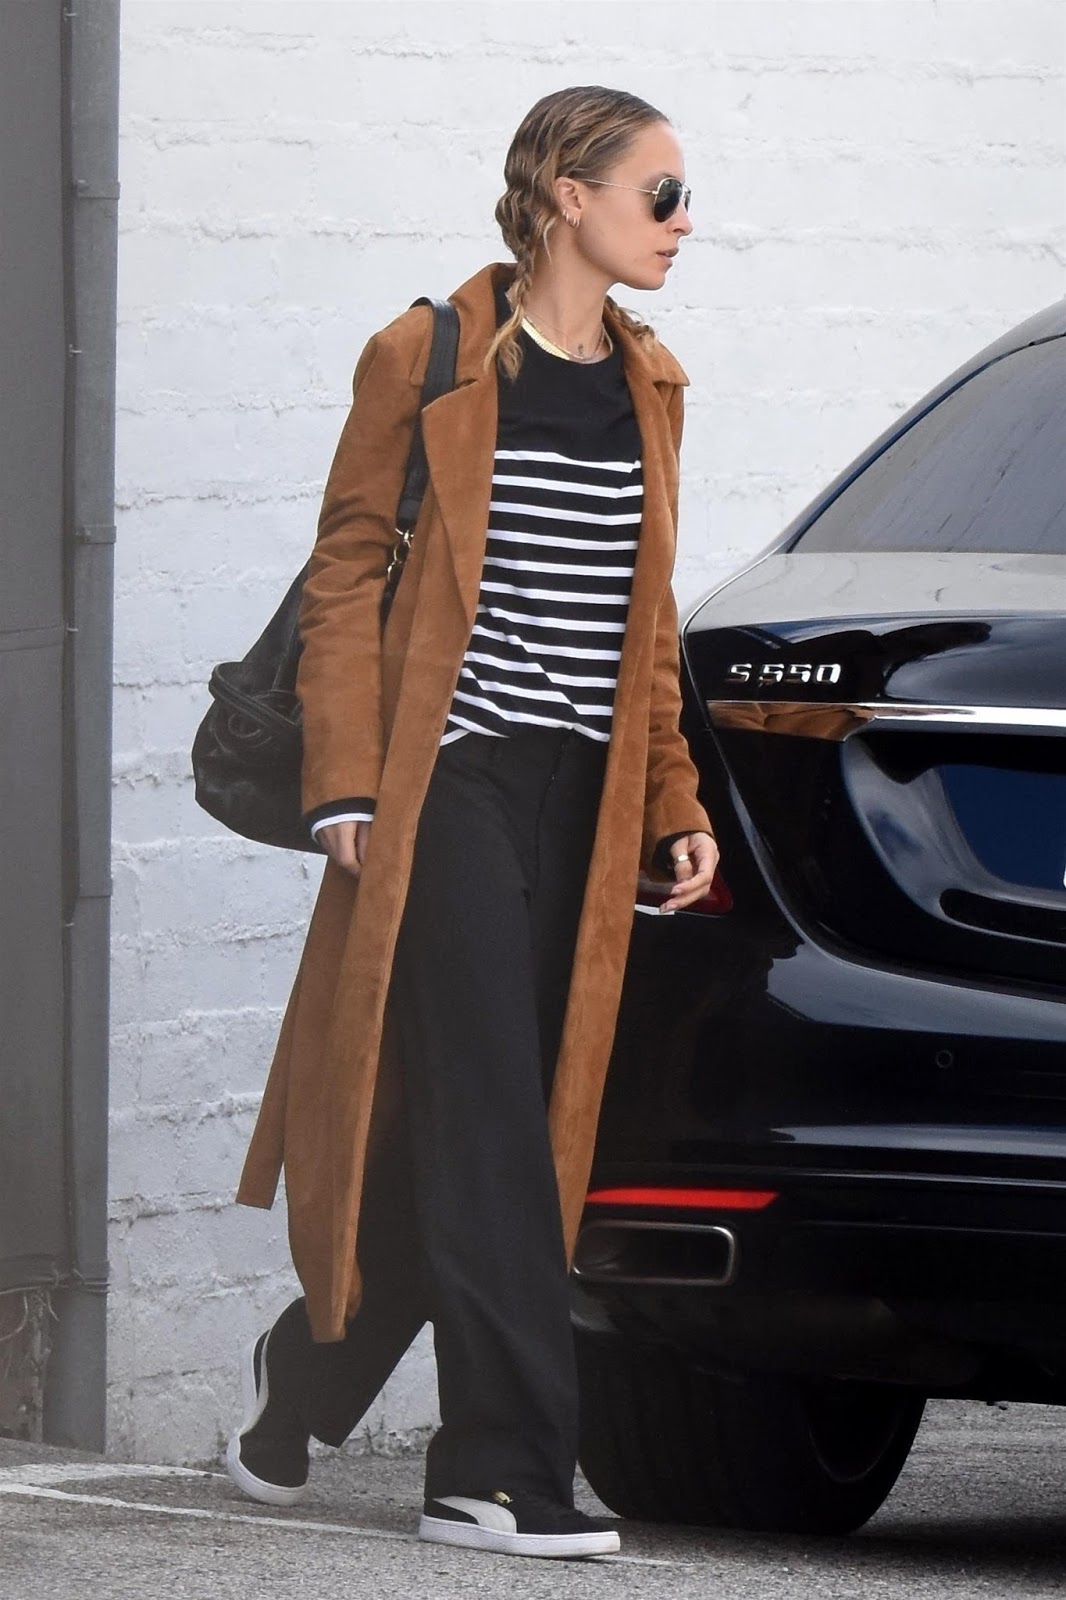 NICOLE RICHIE FASHION: Out in Studio City - March 14